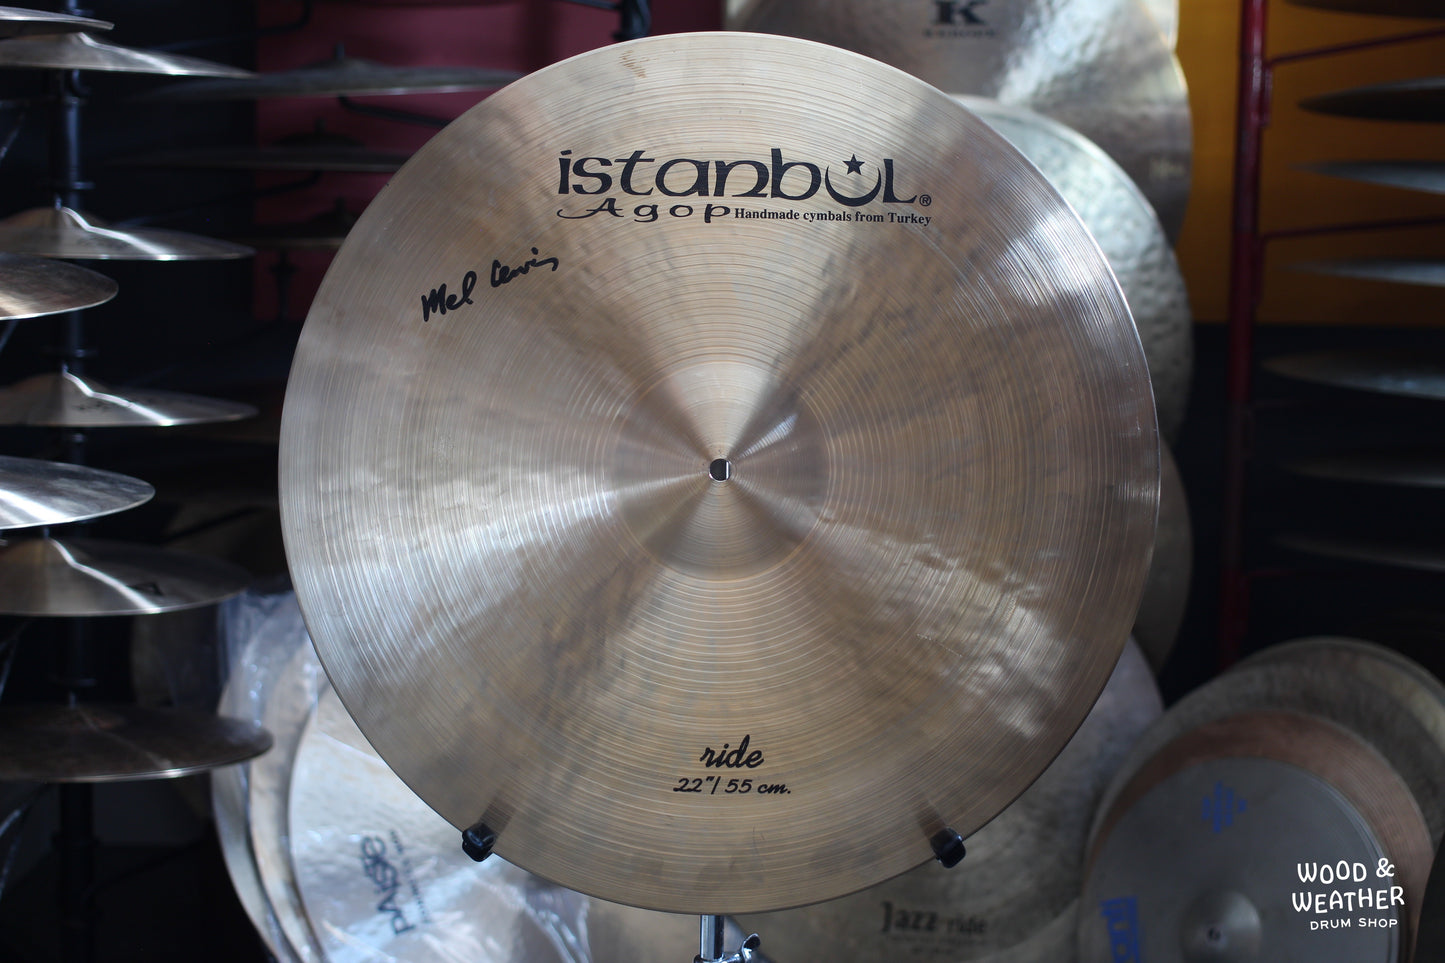 Used Istanbul Agop 22" Signature Mel Lewis Ride Cymbal 2250g